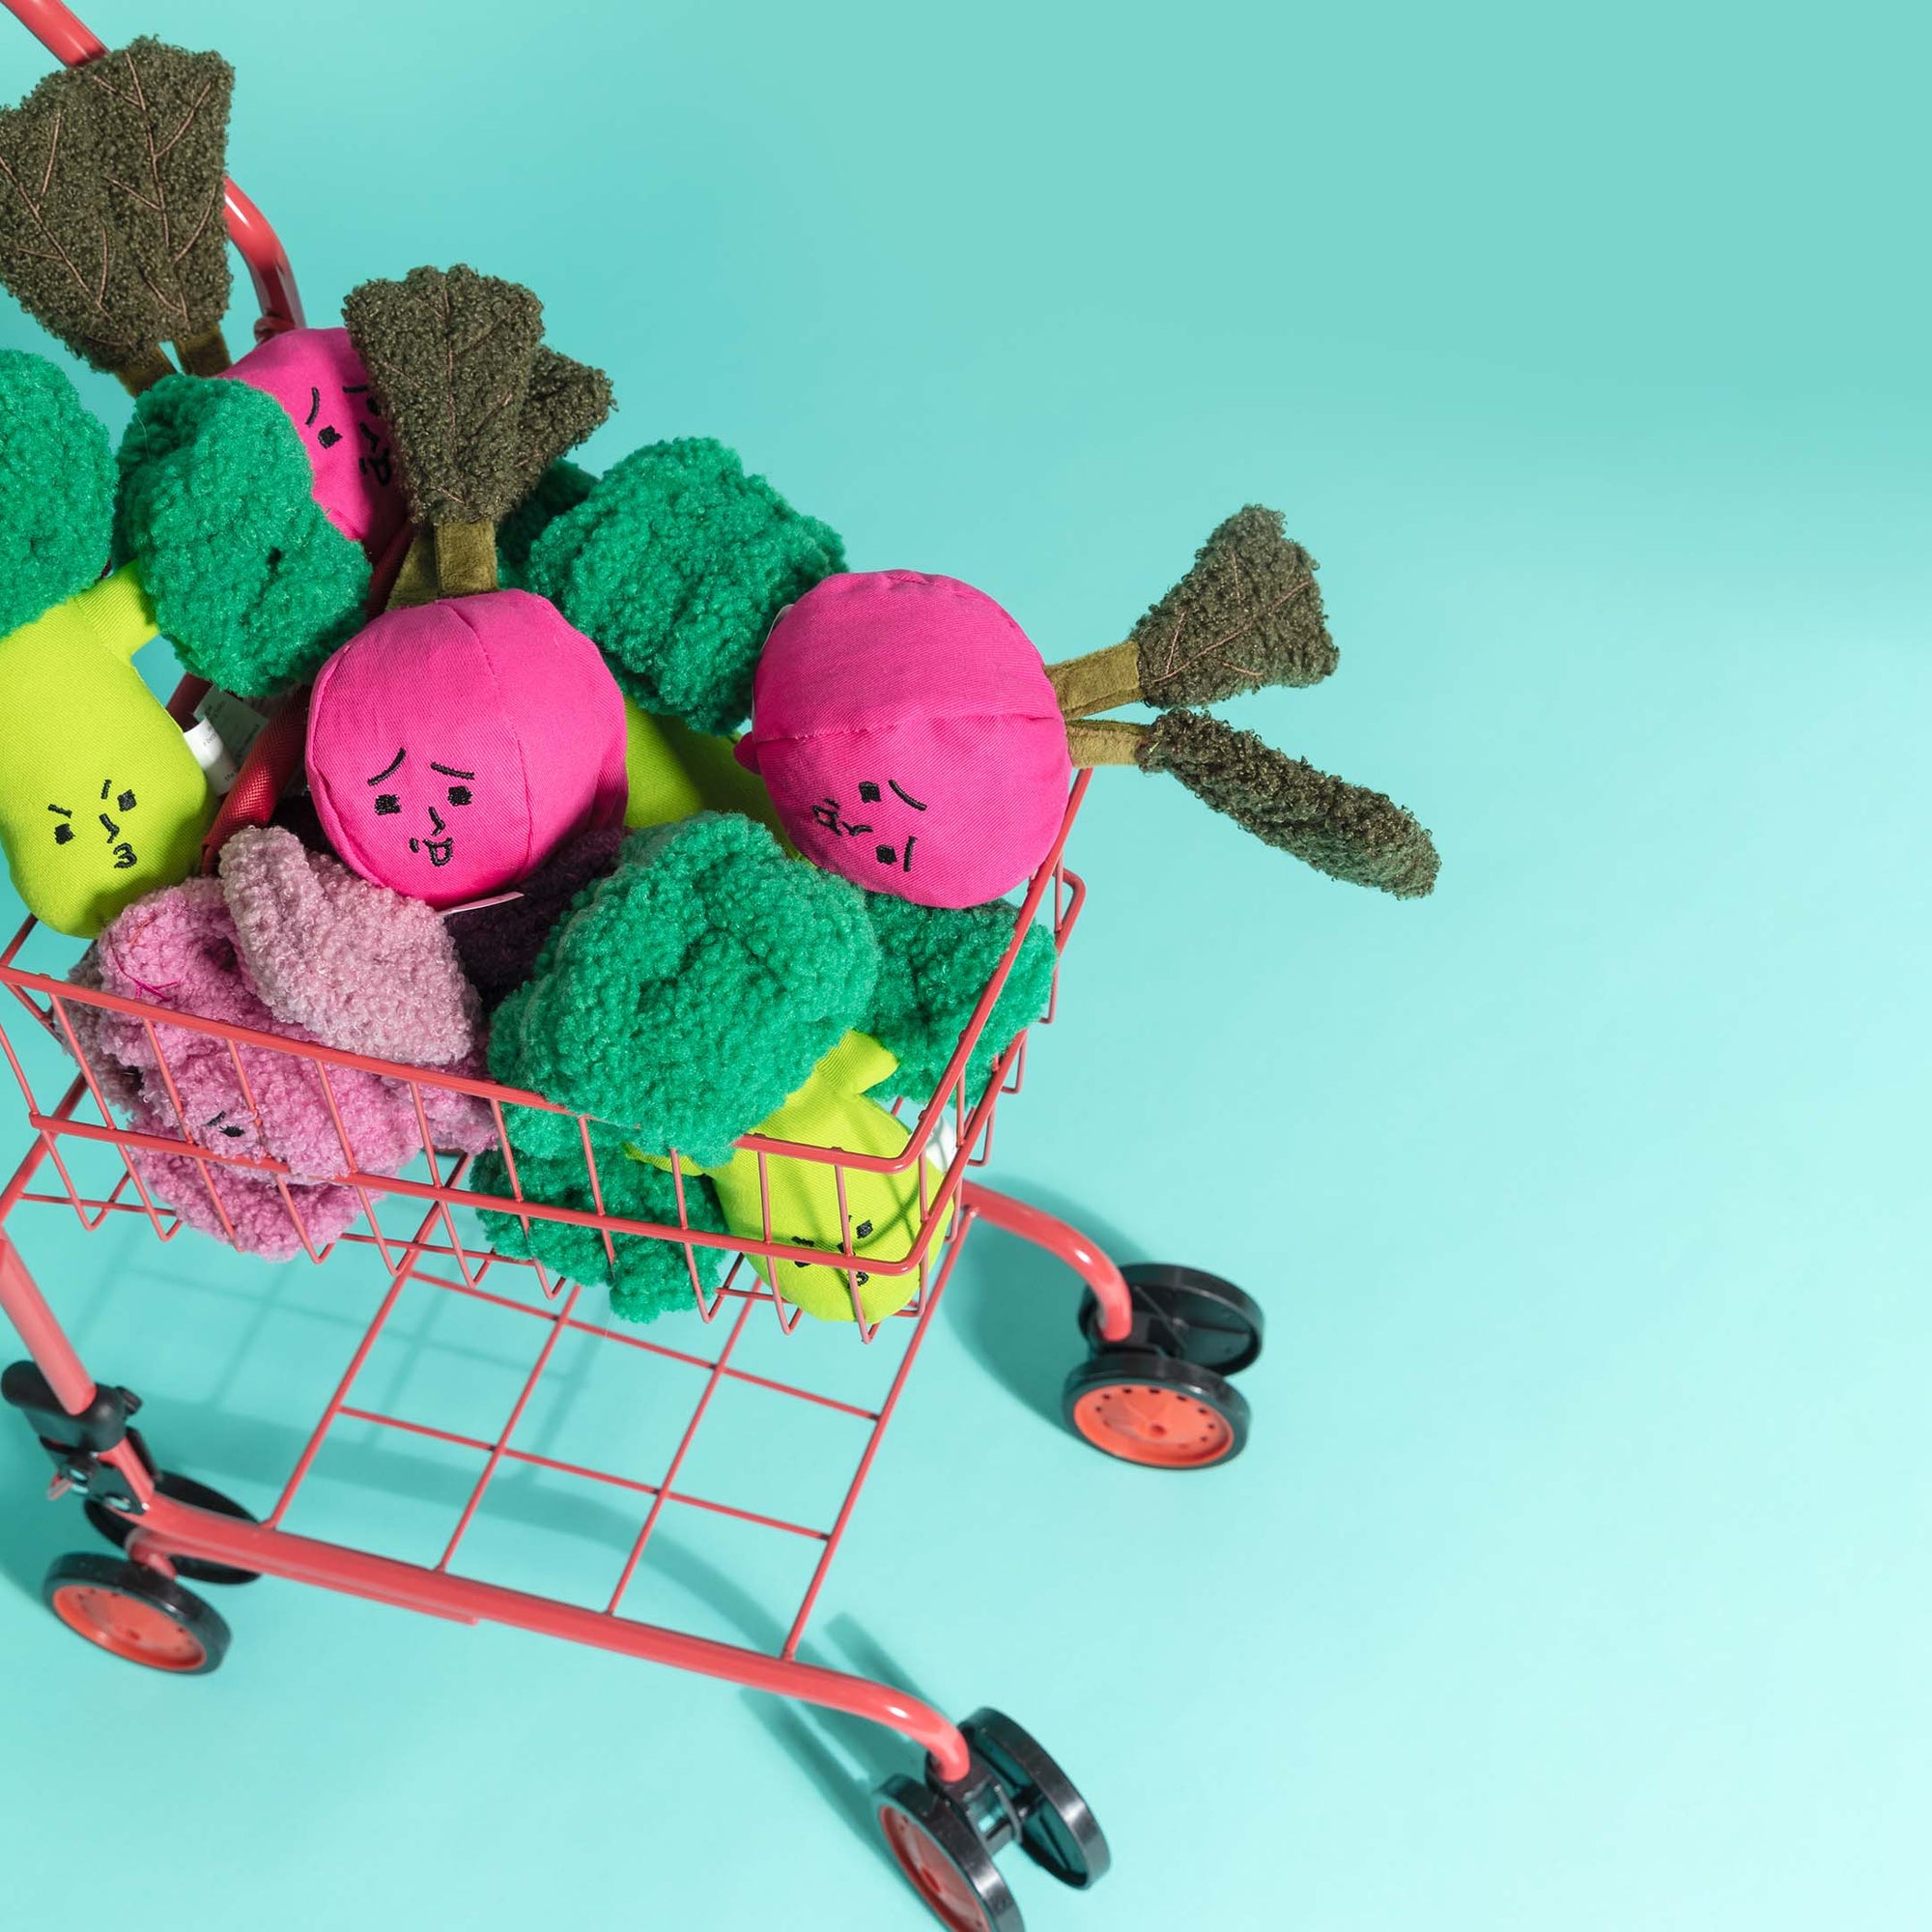 The image shows a miniature shopping cart overflowing with colorful plush dog toys designed as vegetables with expressive faces. There are broccoli, radish, and other garden variety shapes, each with a whimsical character. The scene is set against a bright turquoise background, which enhances the playful and vibrant appearance of the toys, suggesting a fun and engaging playtime for dogs.